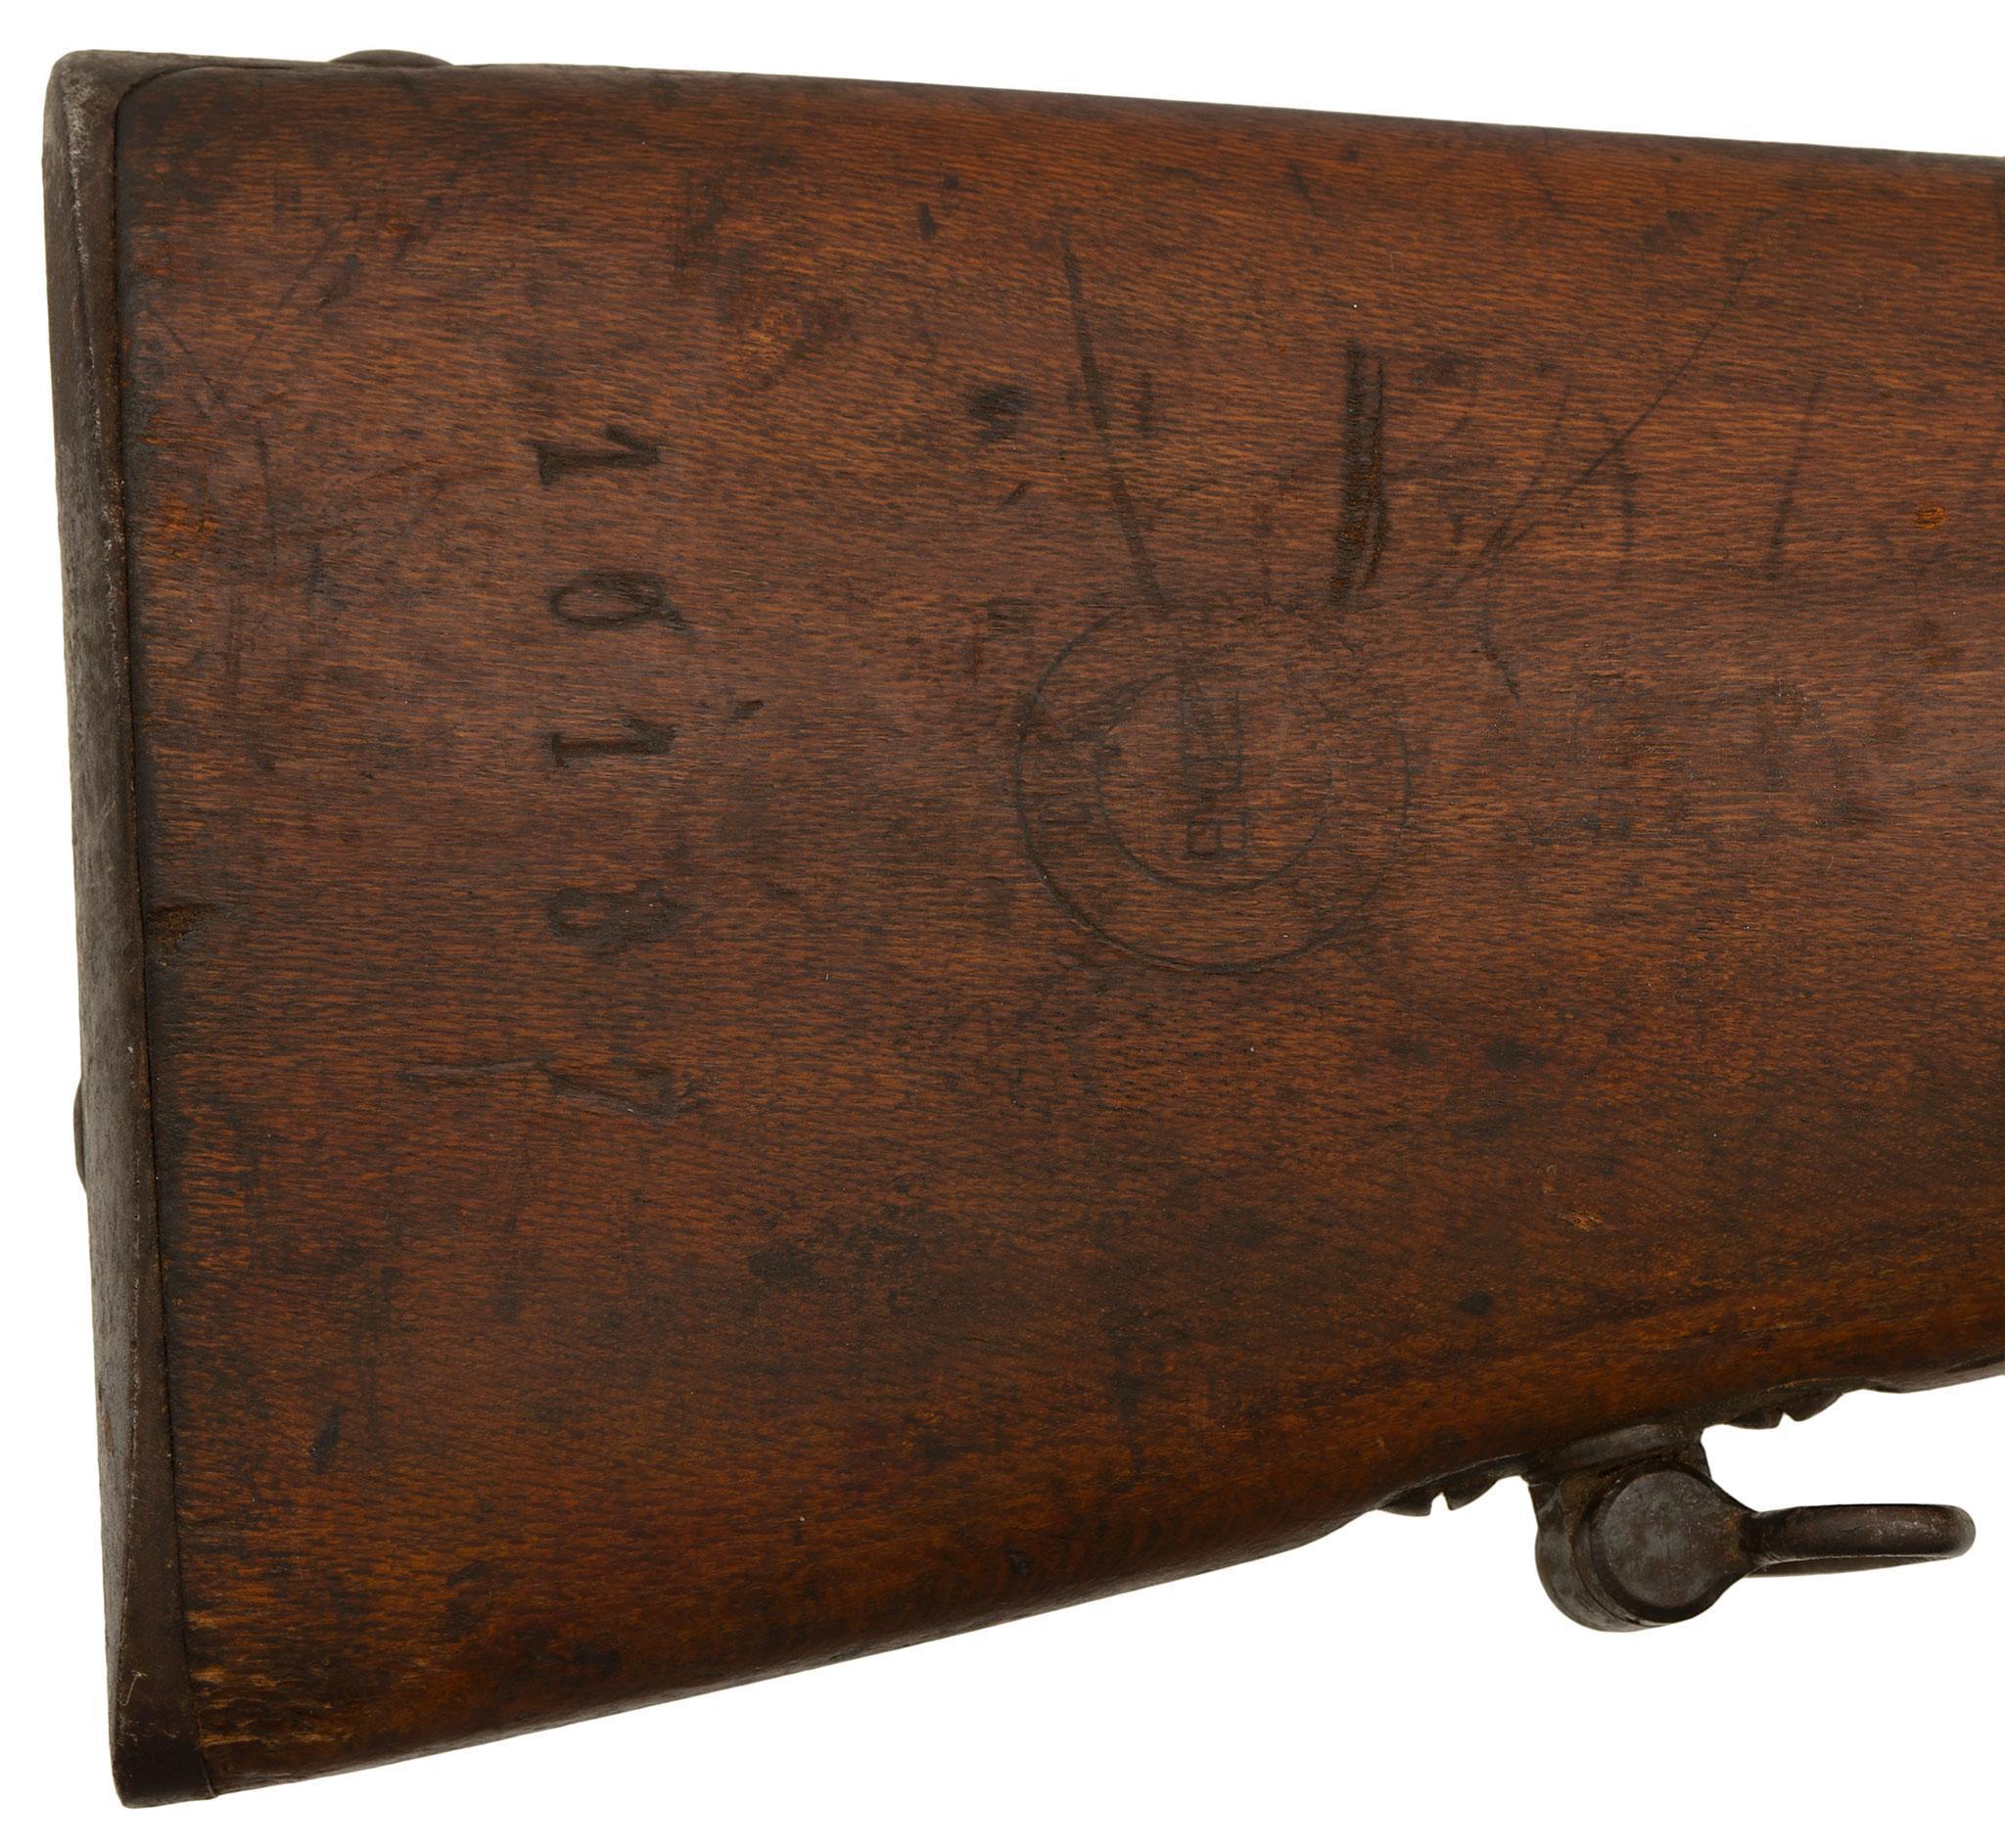 **French Bethier M1907/1915 Carbine